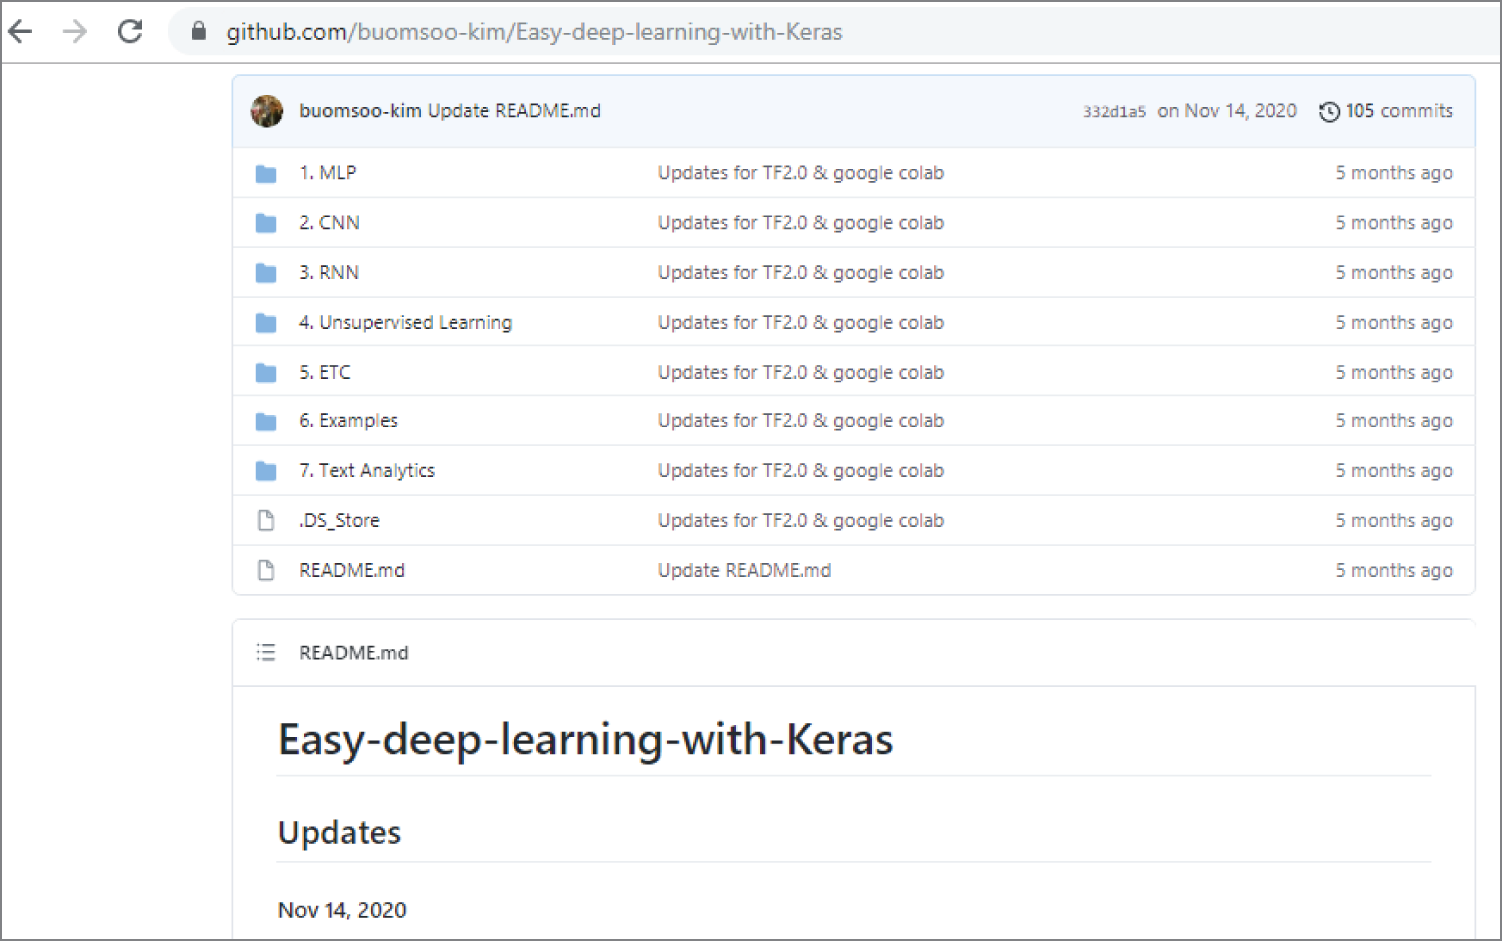 Snapshot of the Easy-deep-learning-with-Keras website.